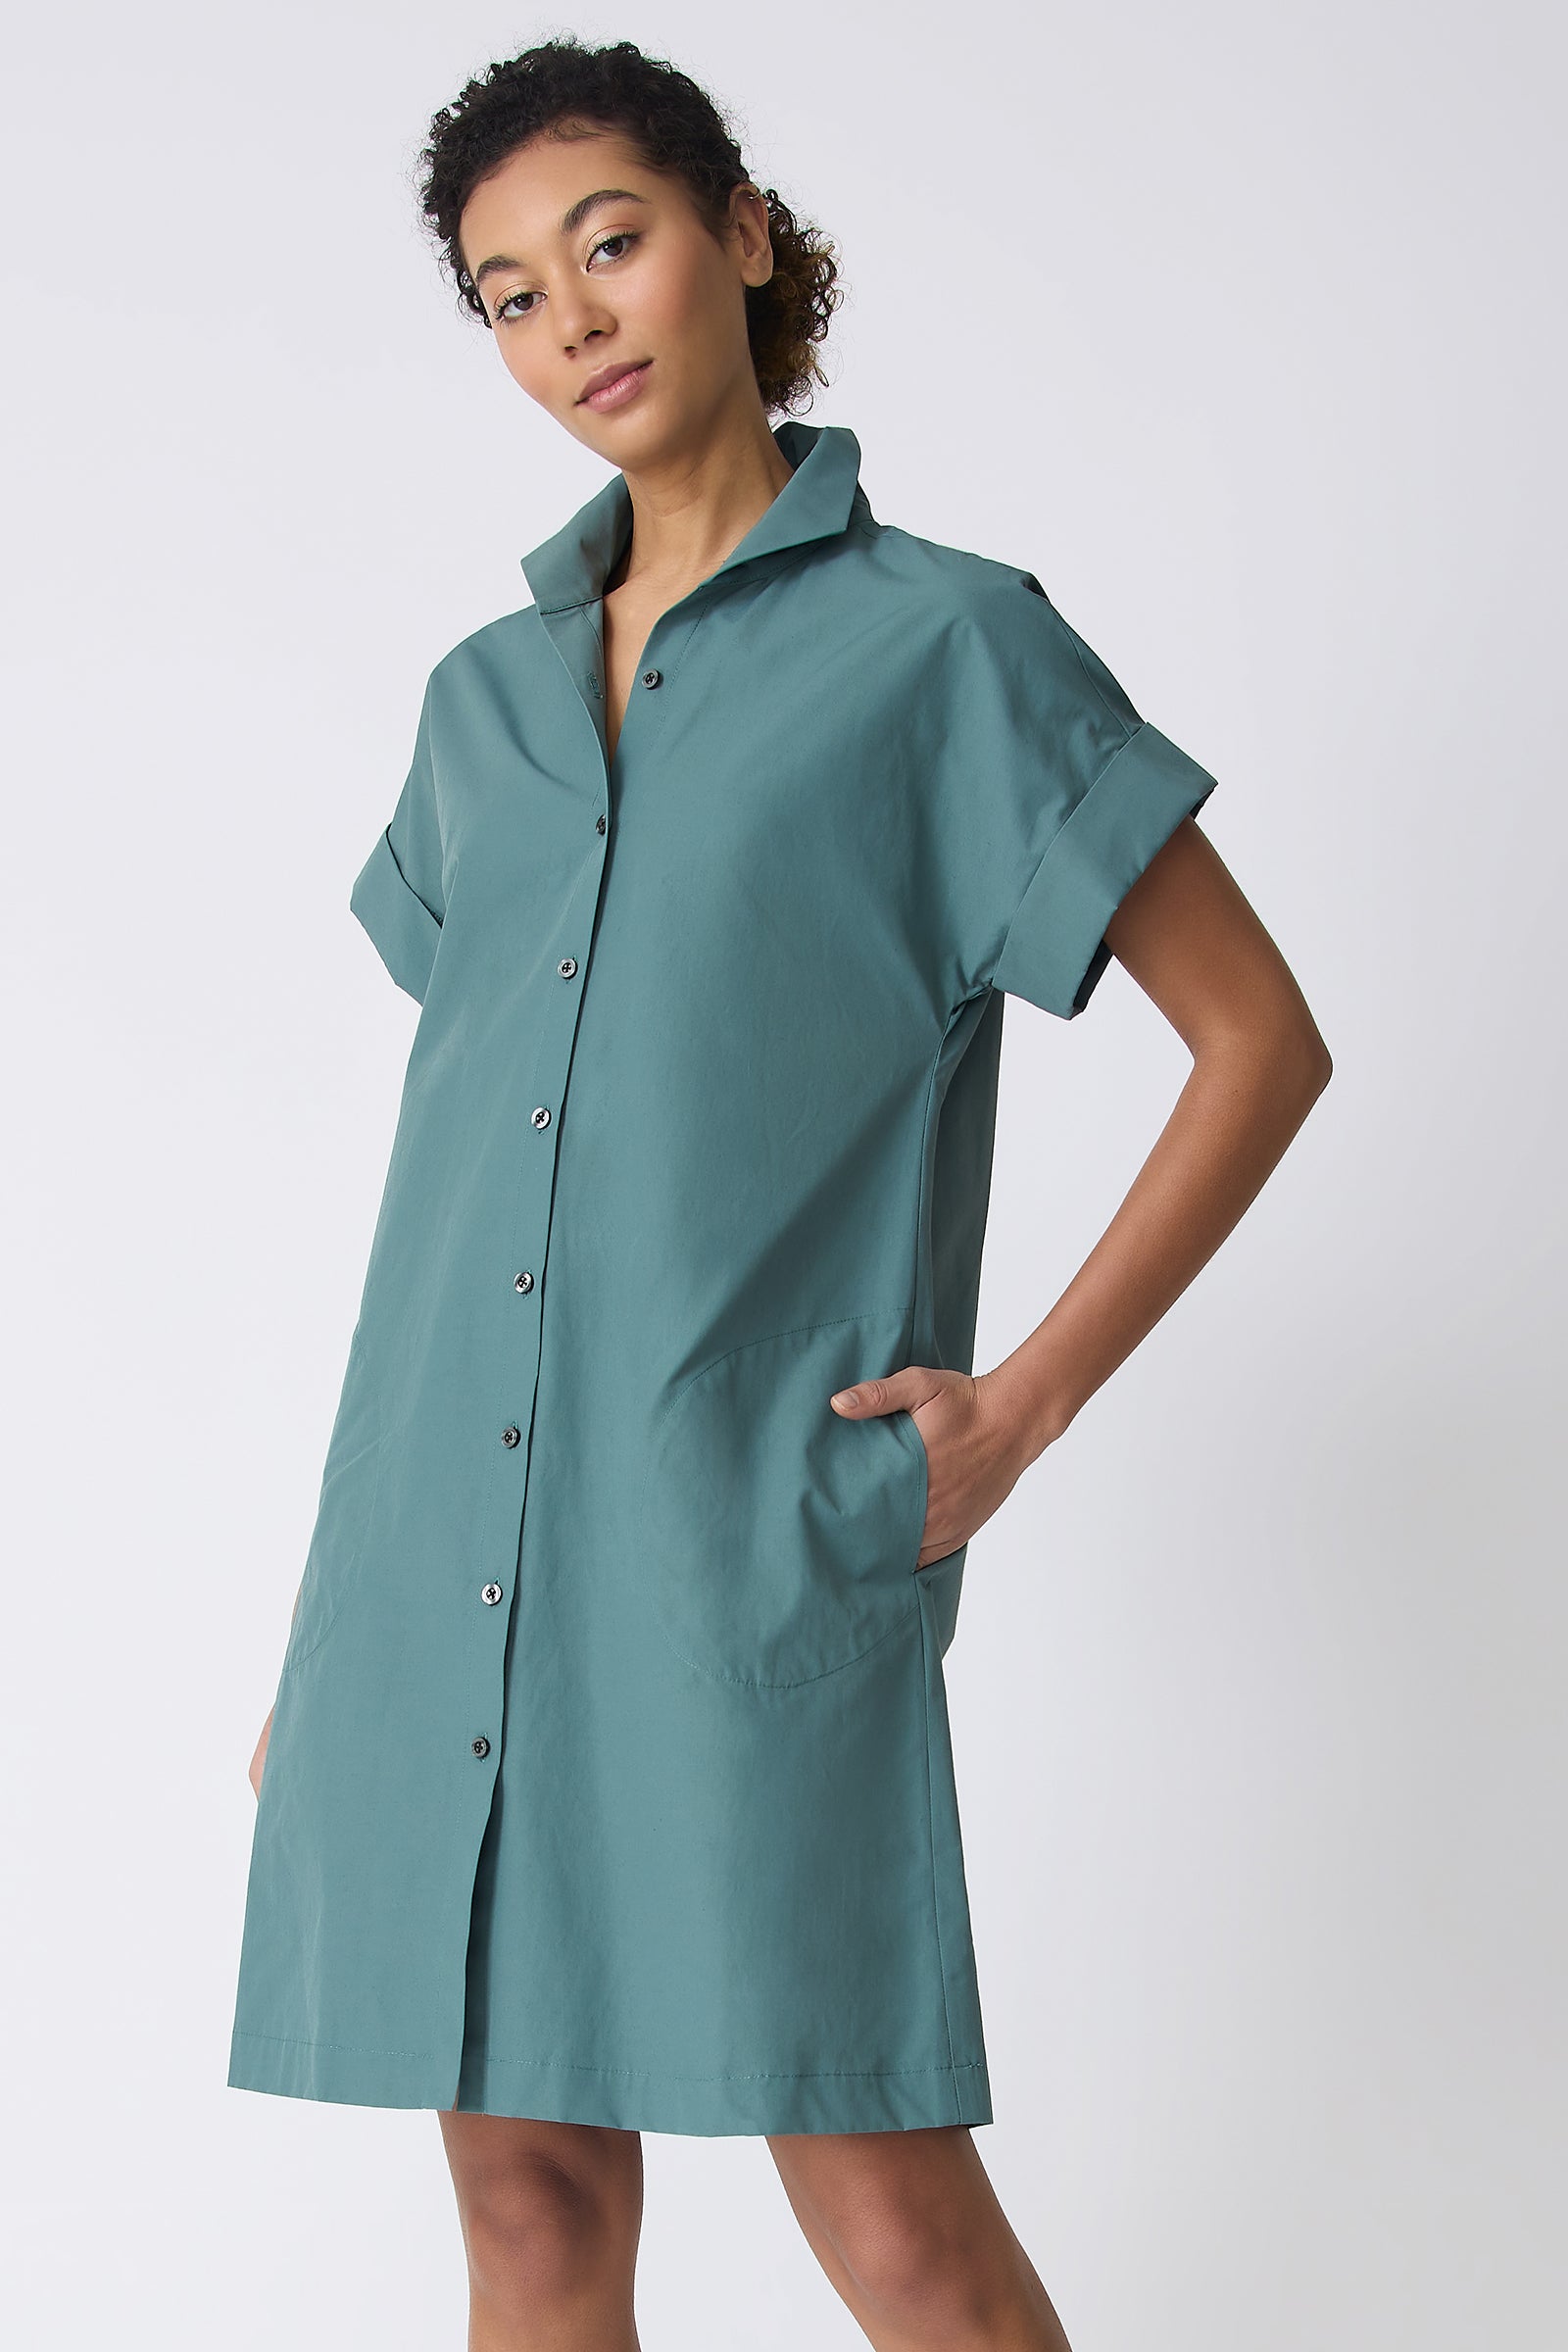 Kal Rieman Holly Kimono Dress in Sage on model with hand in pocket front view